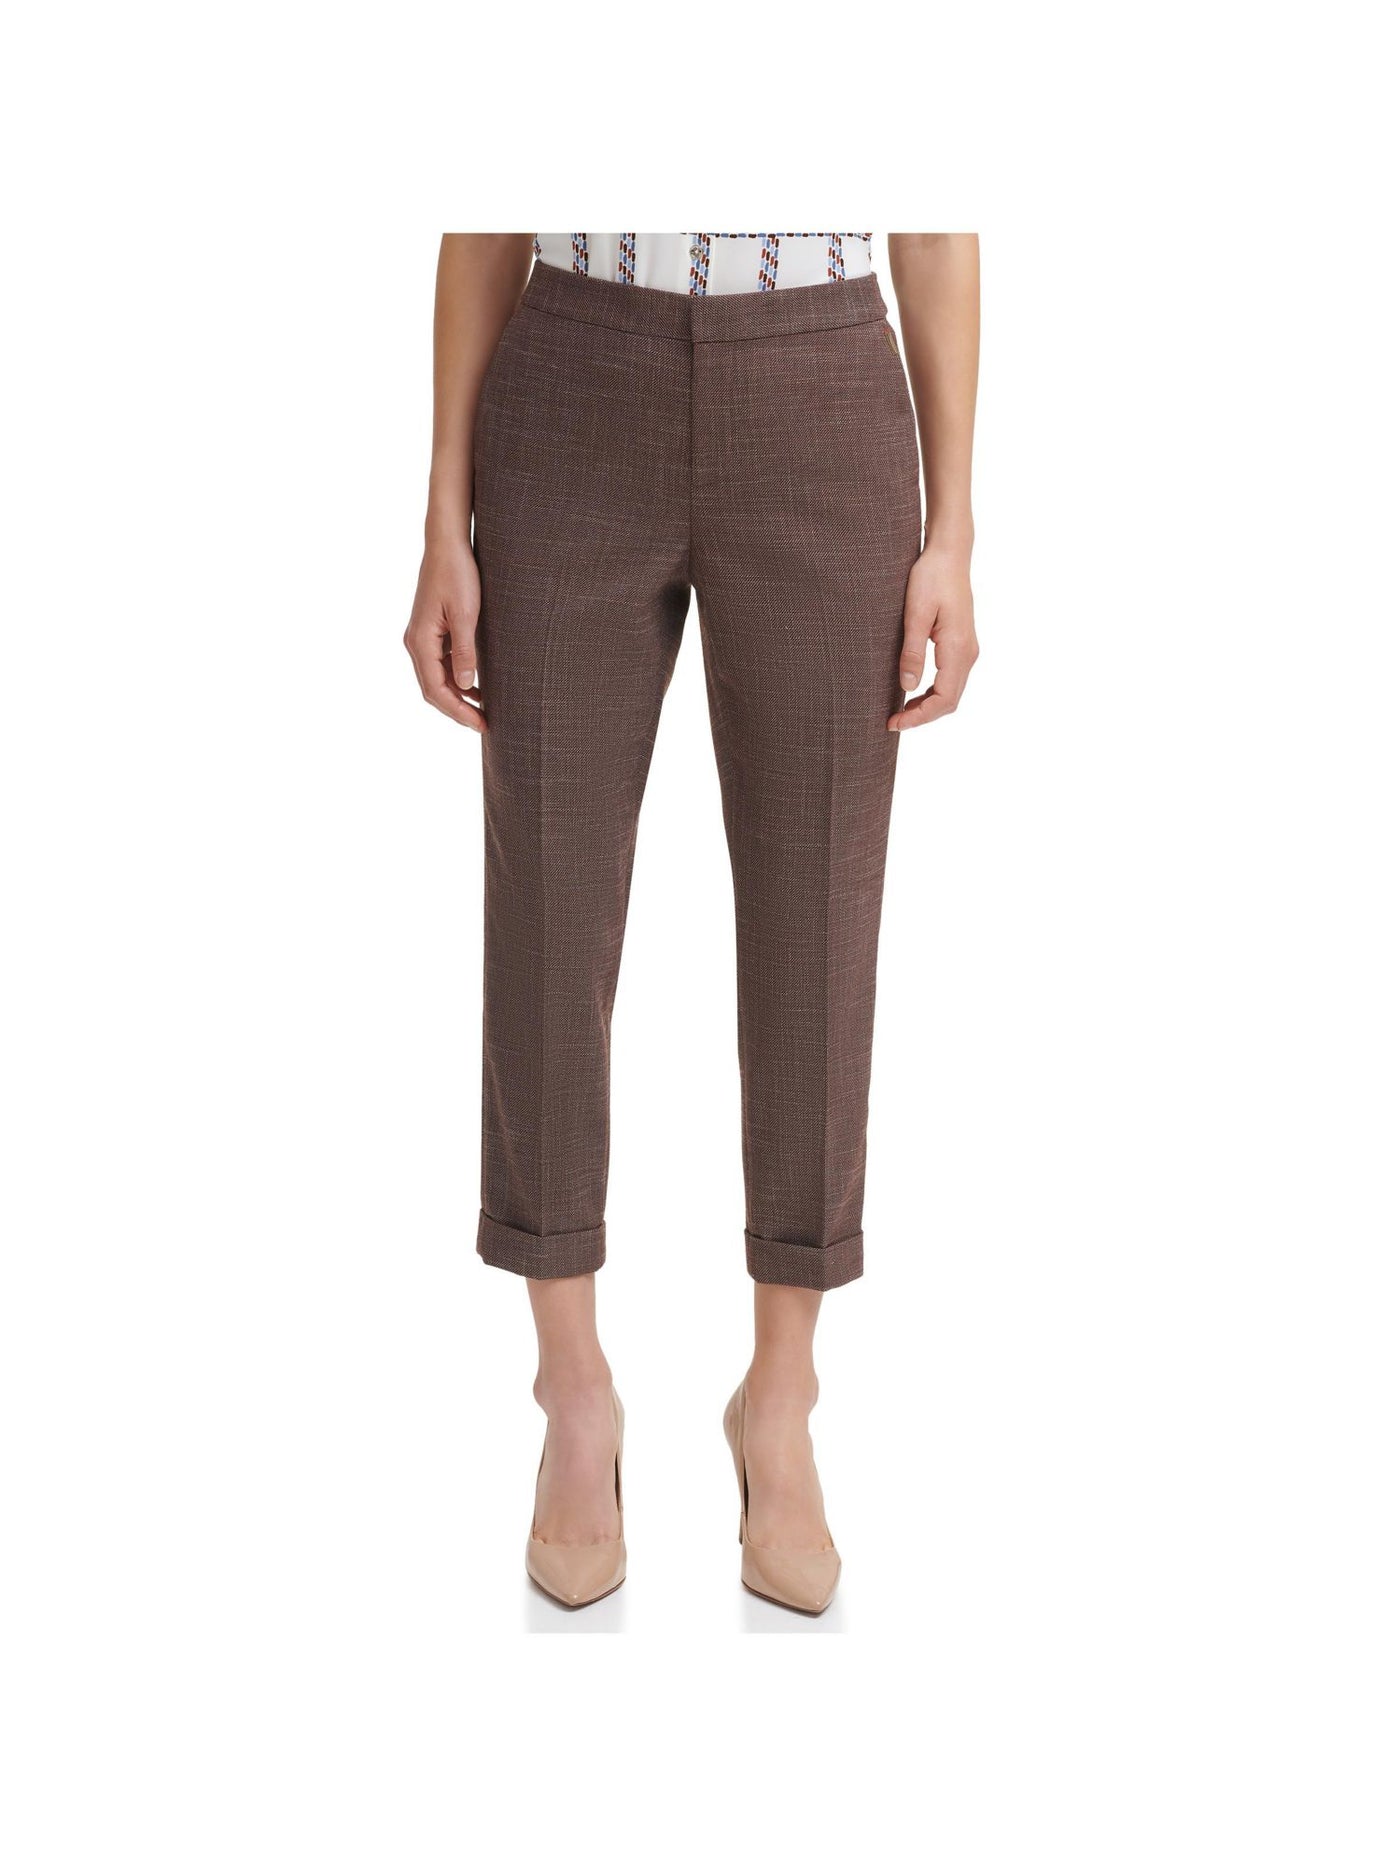 TOMMY HILFIGER Womens Brown Pocketed Wear To Work Cuffed Pants 14